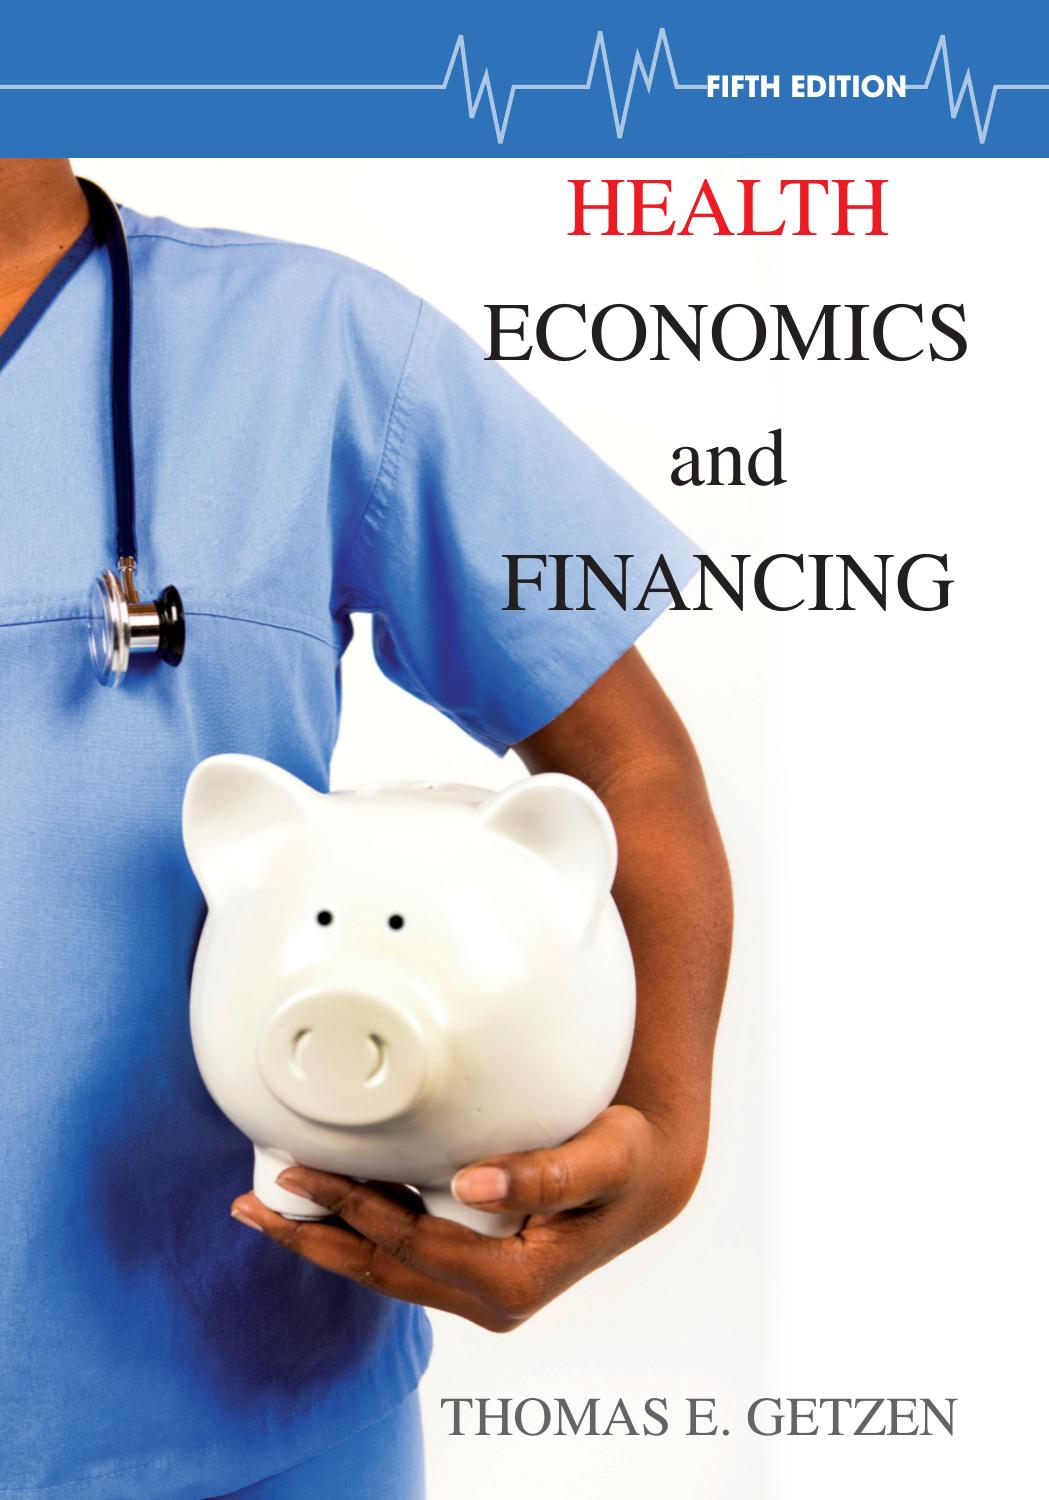 Health Economics and Financing 5th Edition by Getzen.jpg